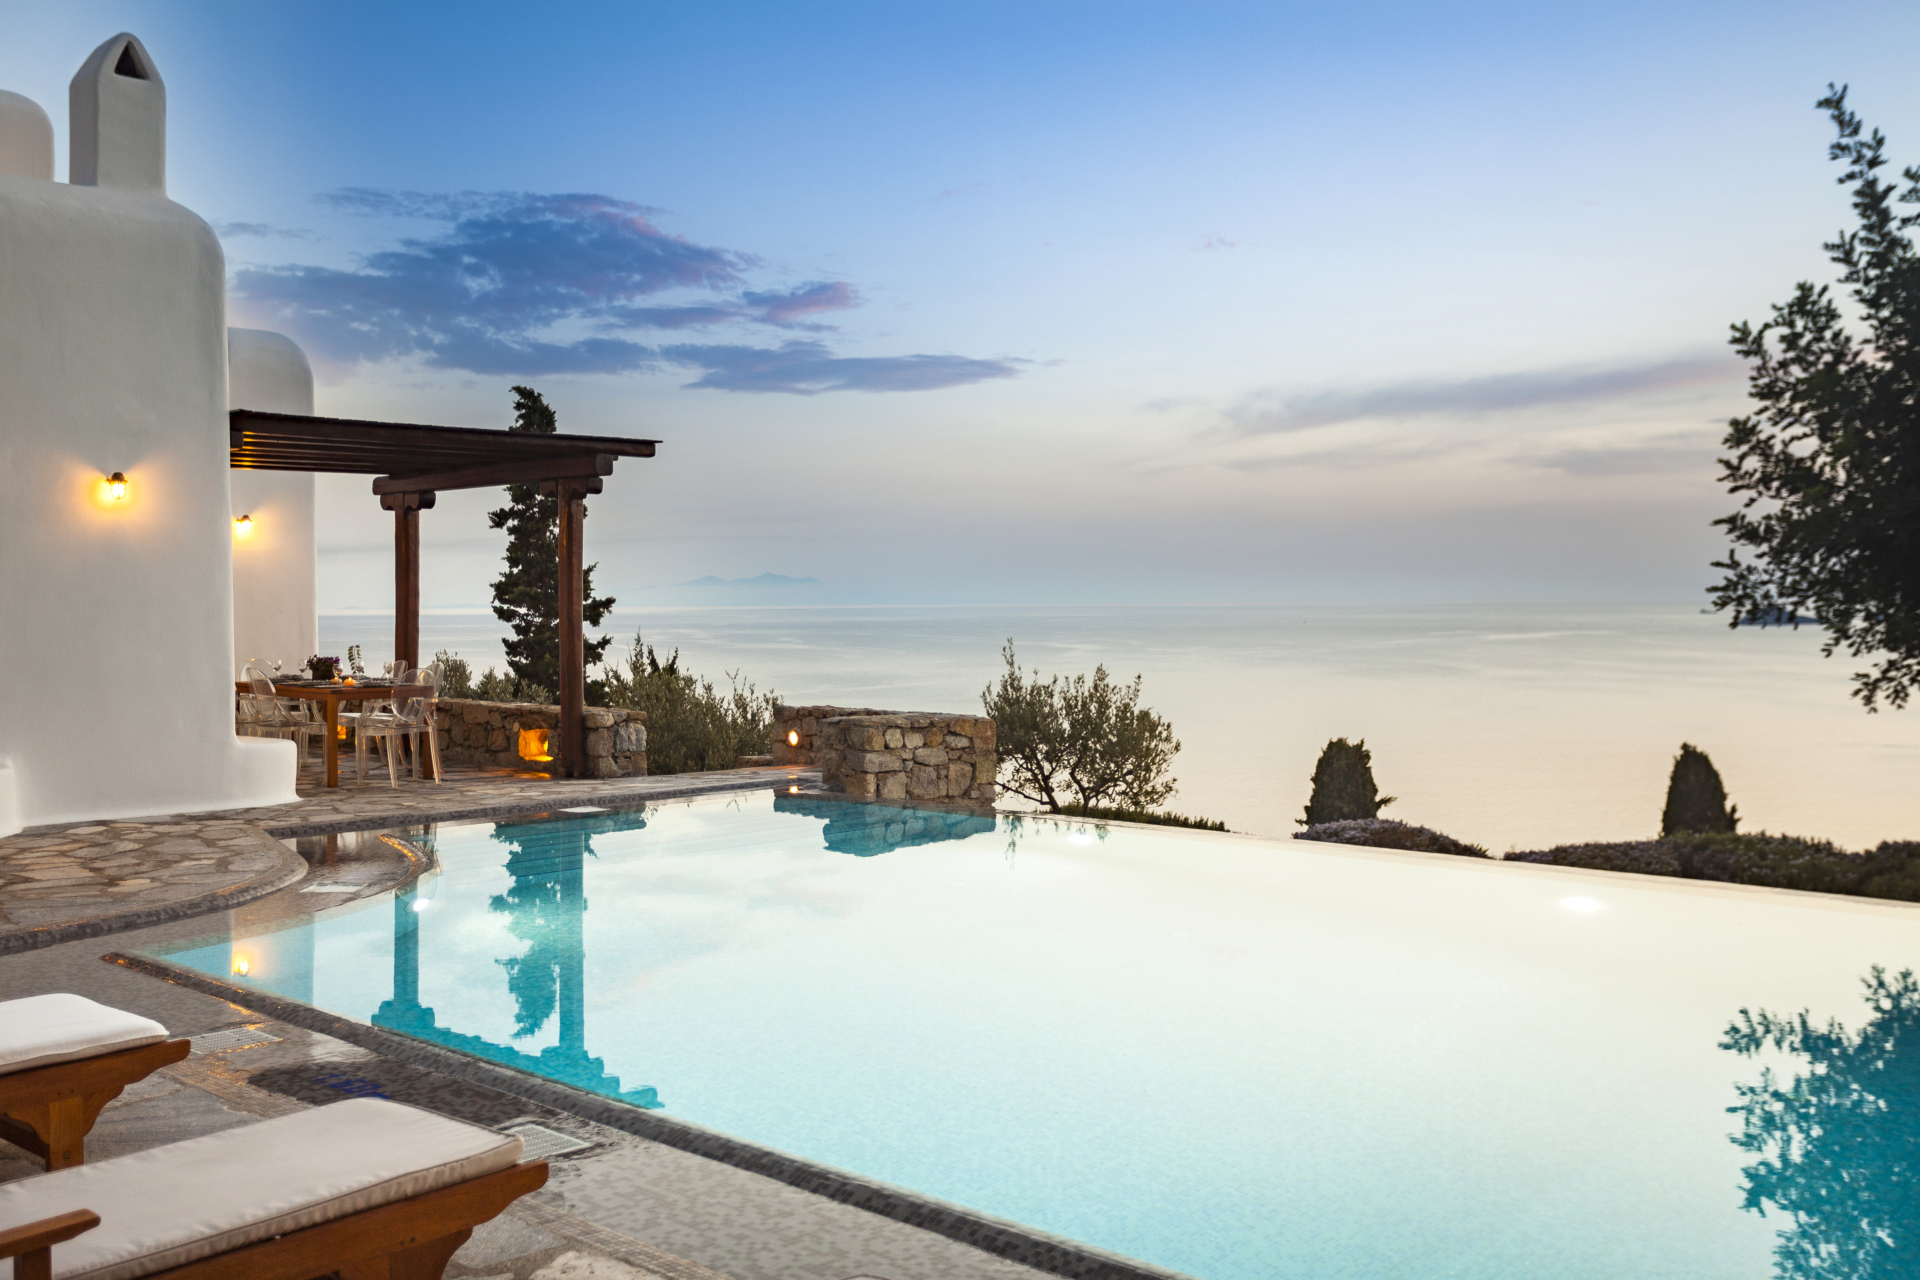 Villa Aphrodite, one of AGL's luxury villas in mykonos with private pool just before sunset